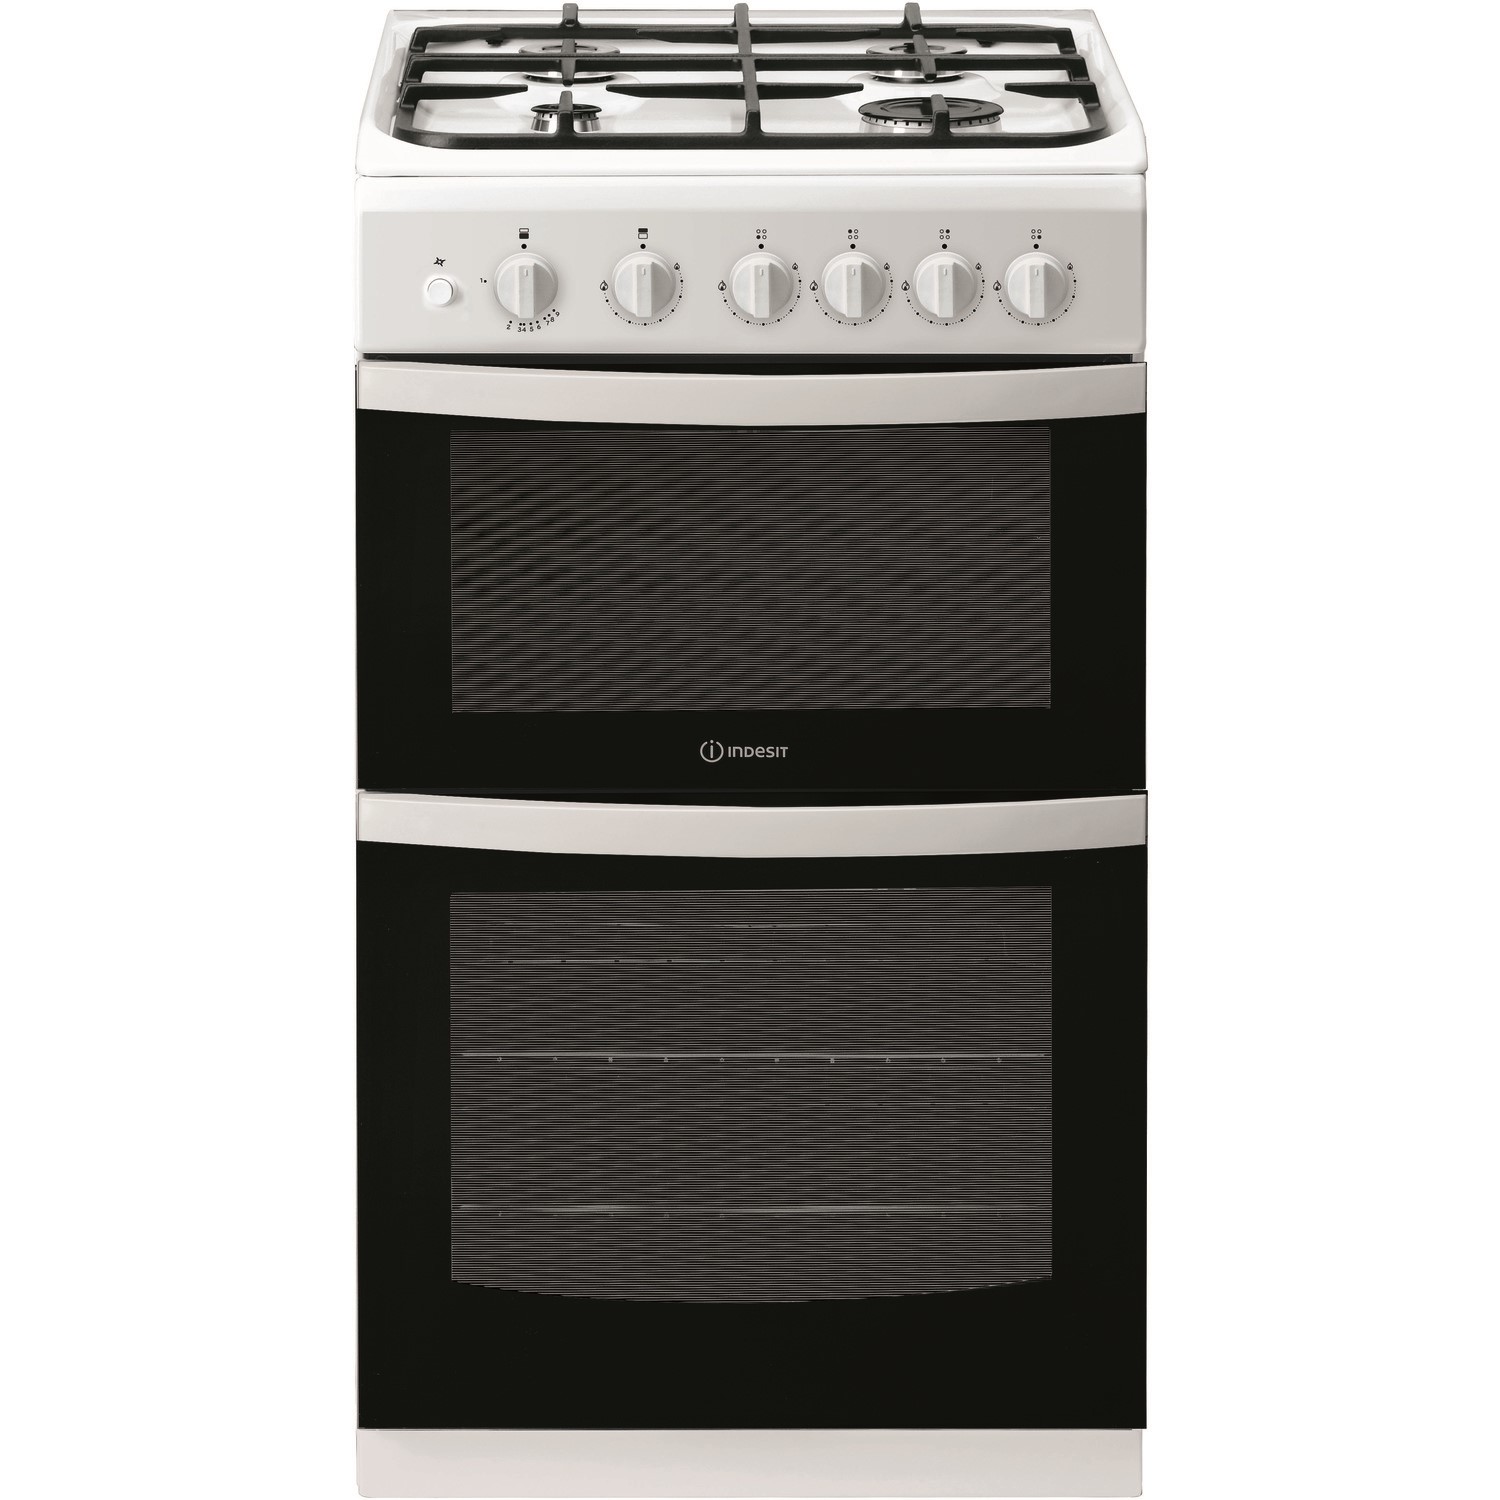 Indesit 50cm Double Cavity Gas Cooker - White